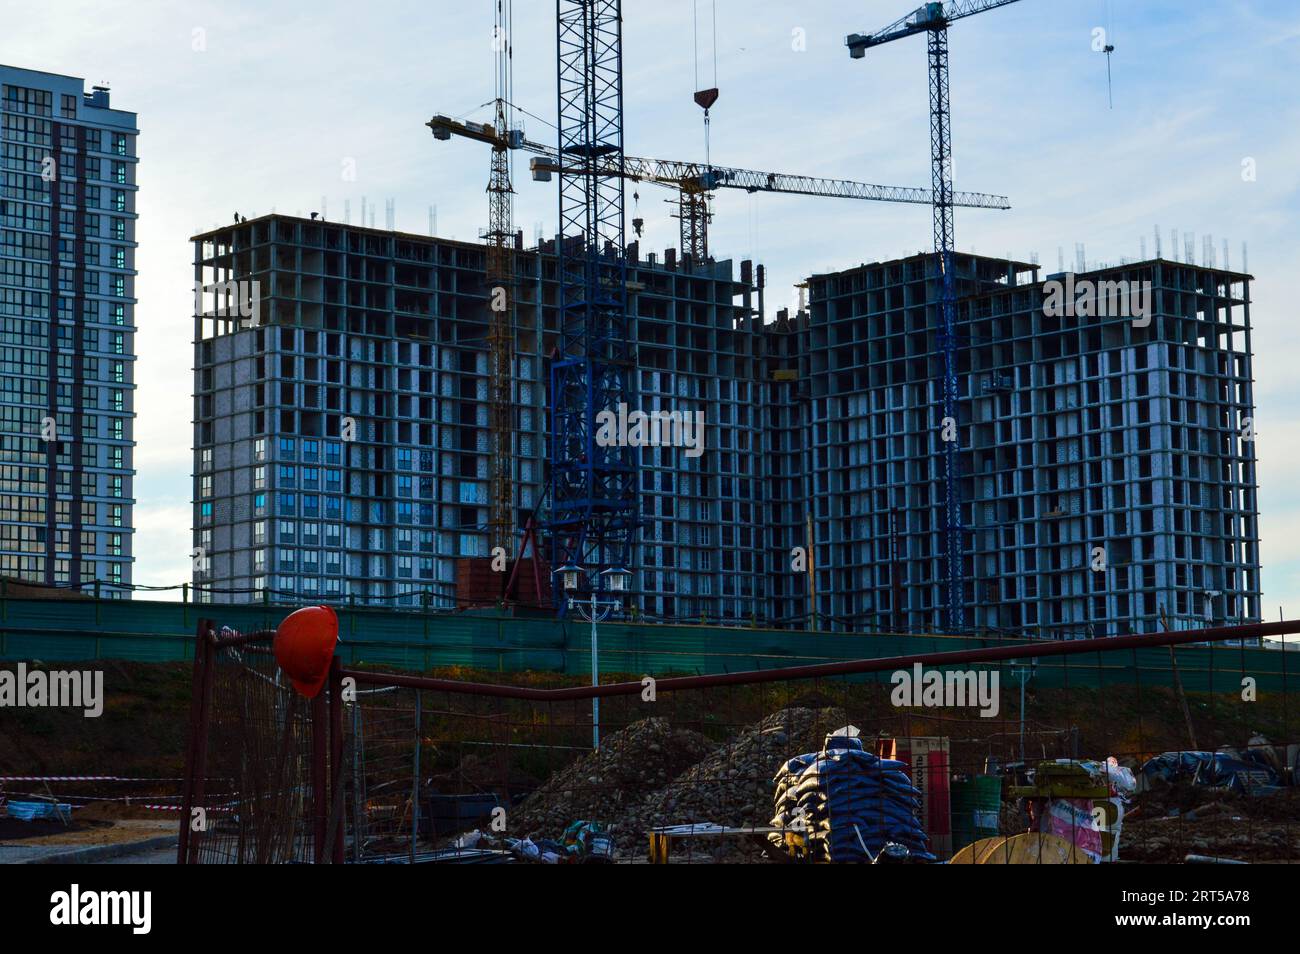 tall concrete houses are being built in the city center. multi-storey buildings, concrete boxes against the backdrop of large cranes for carrying heav Stock Photo